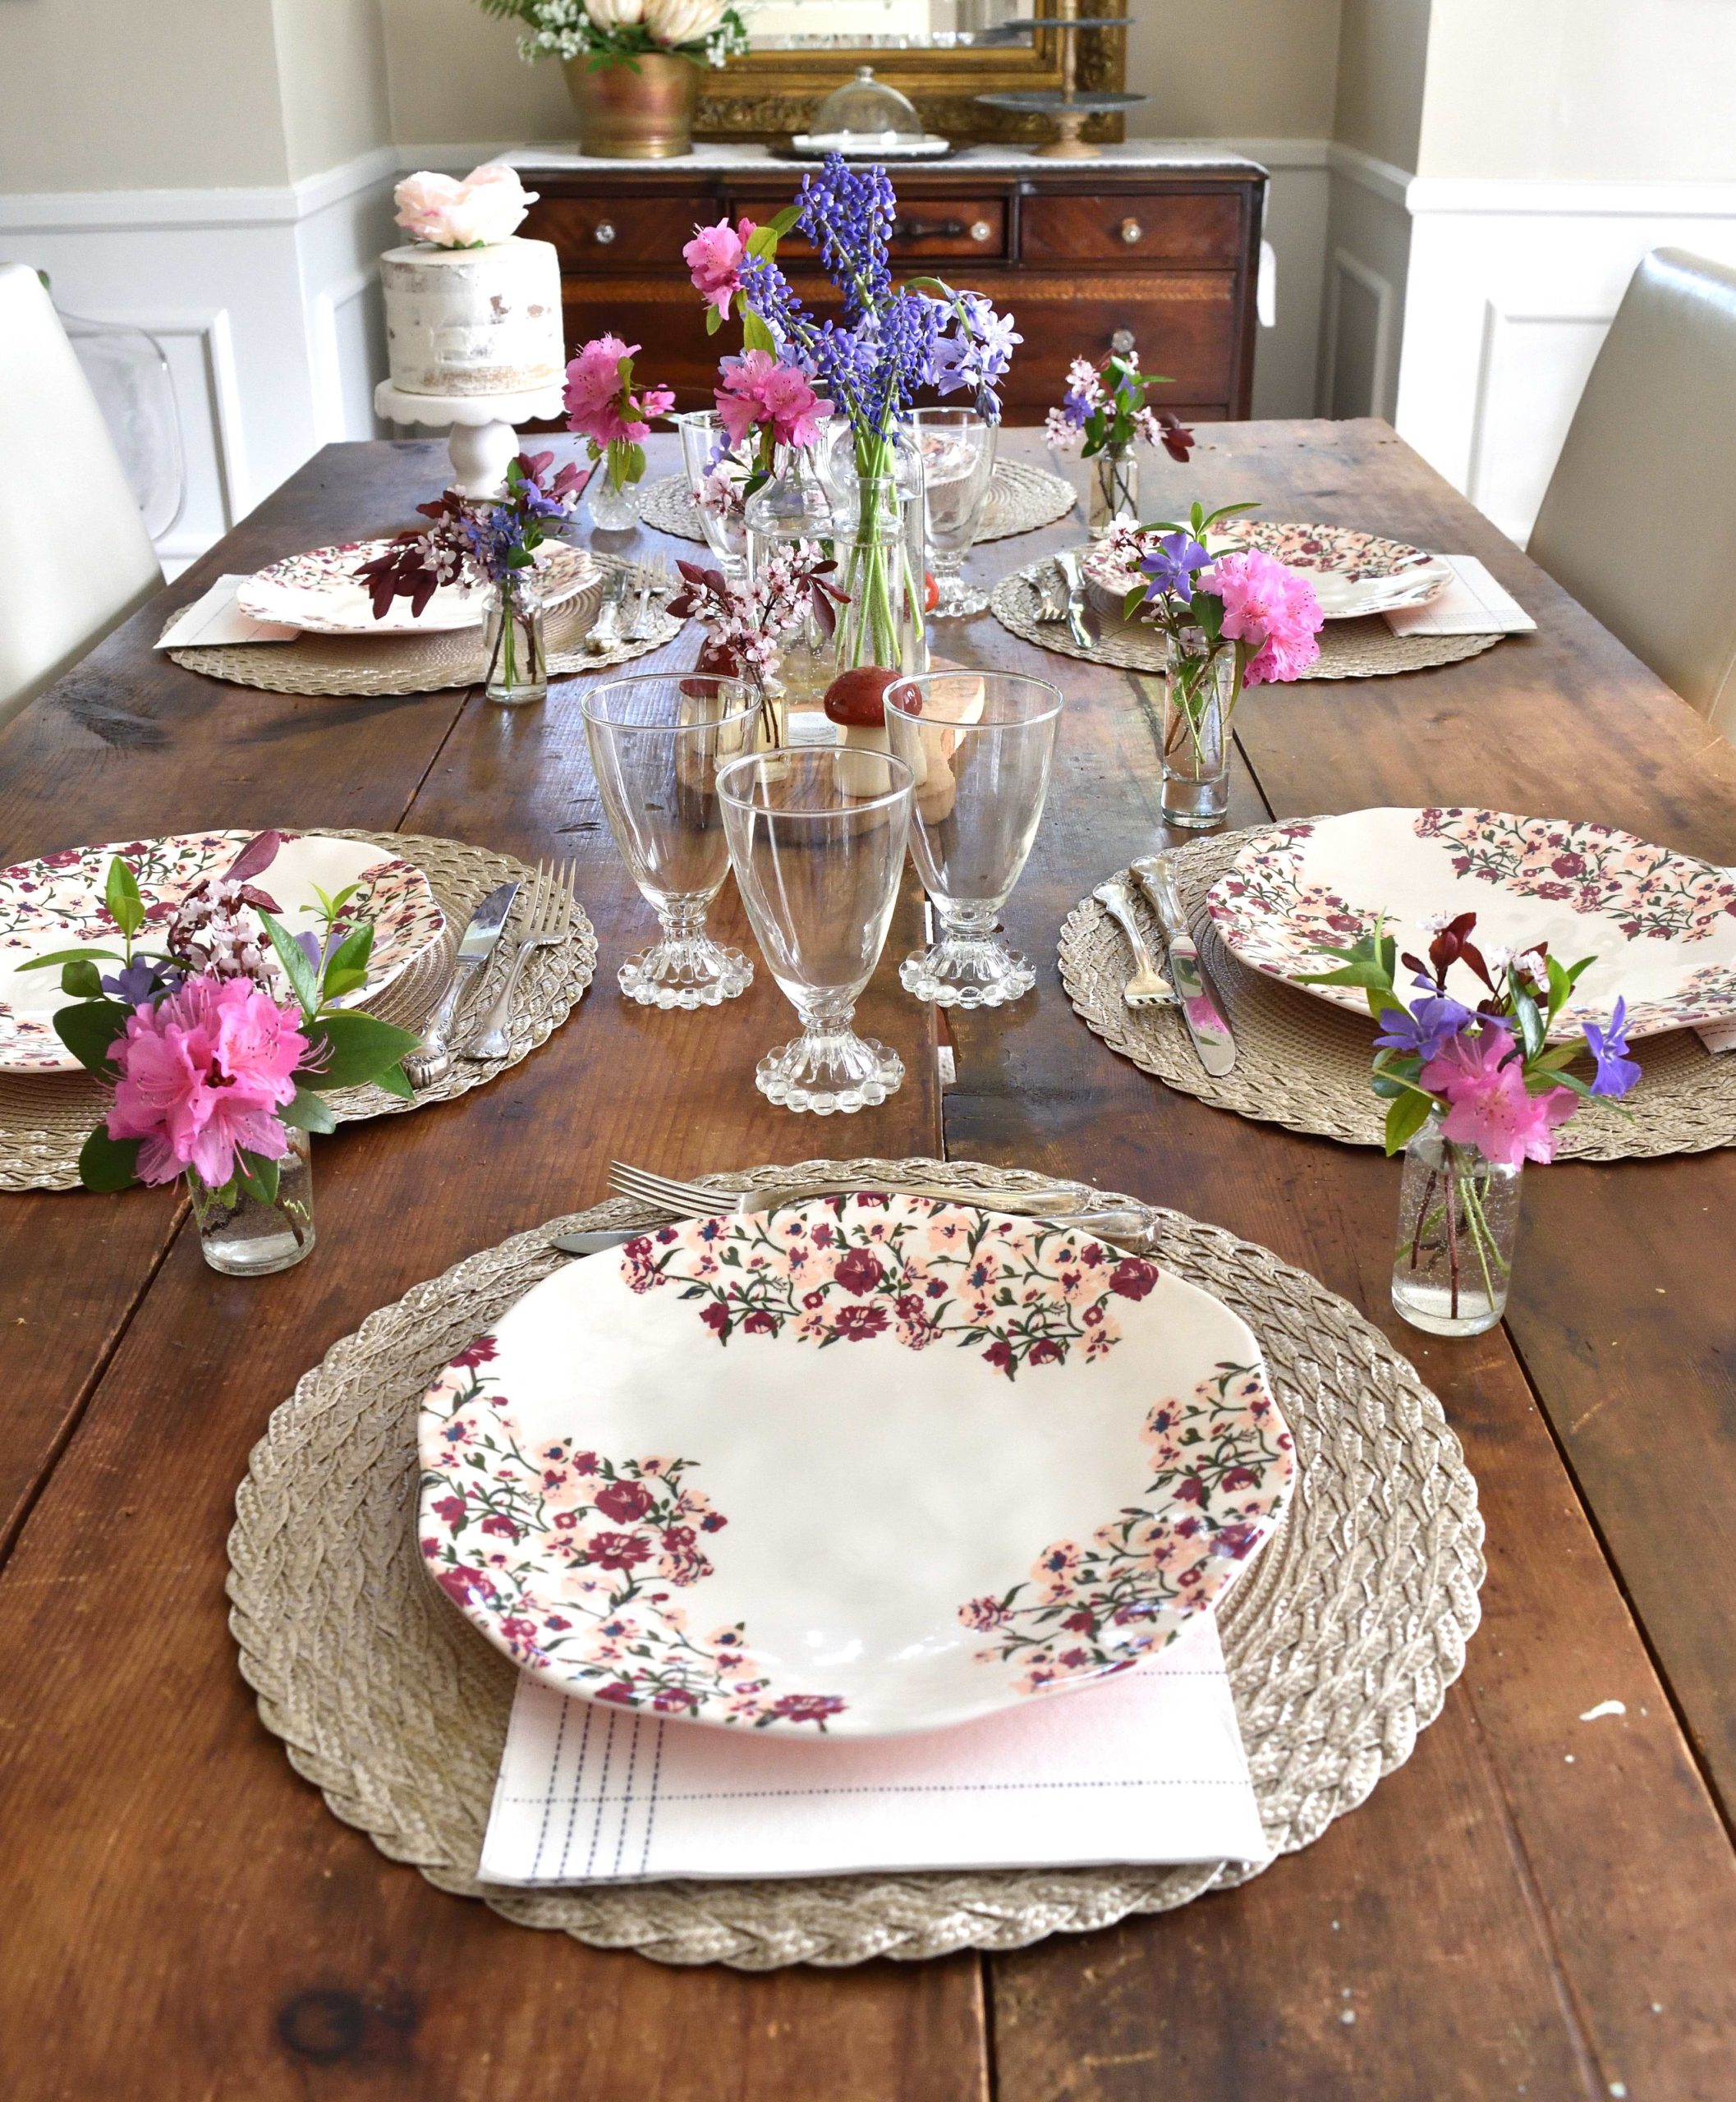 A springtime table for Mother's Day